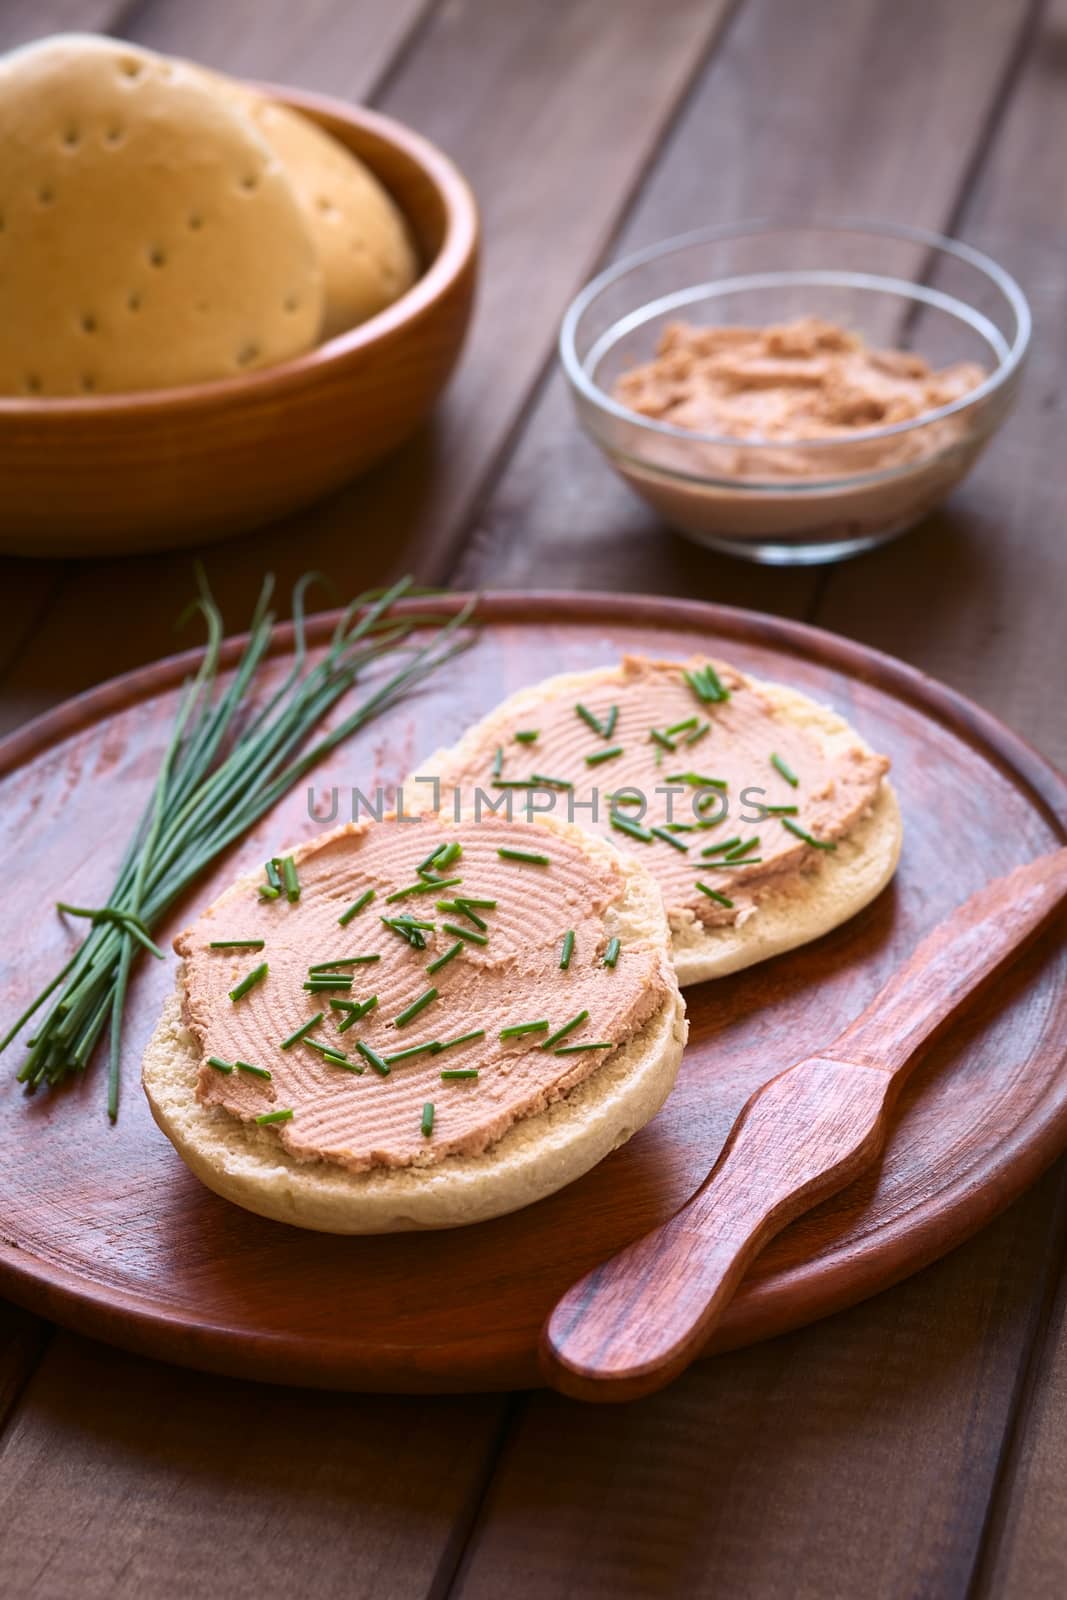 Liverwurst Spread on Bun with Chives by ildi